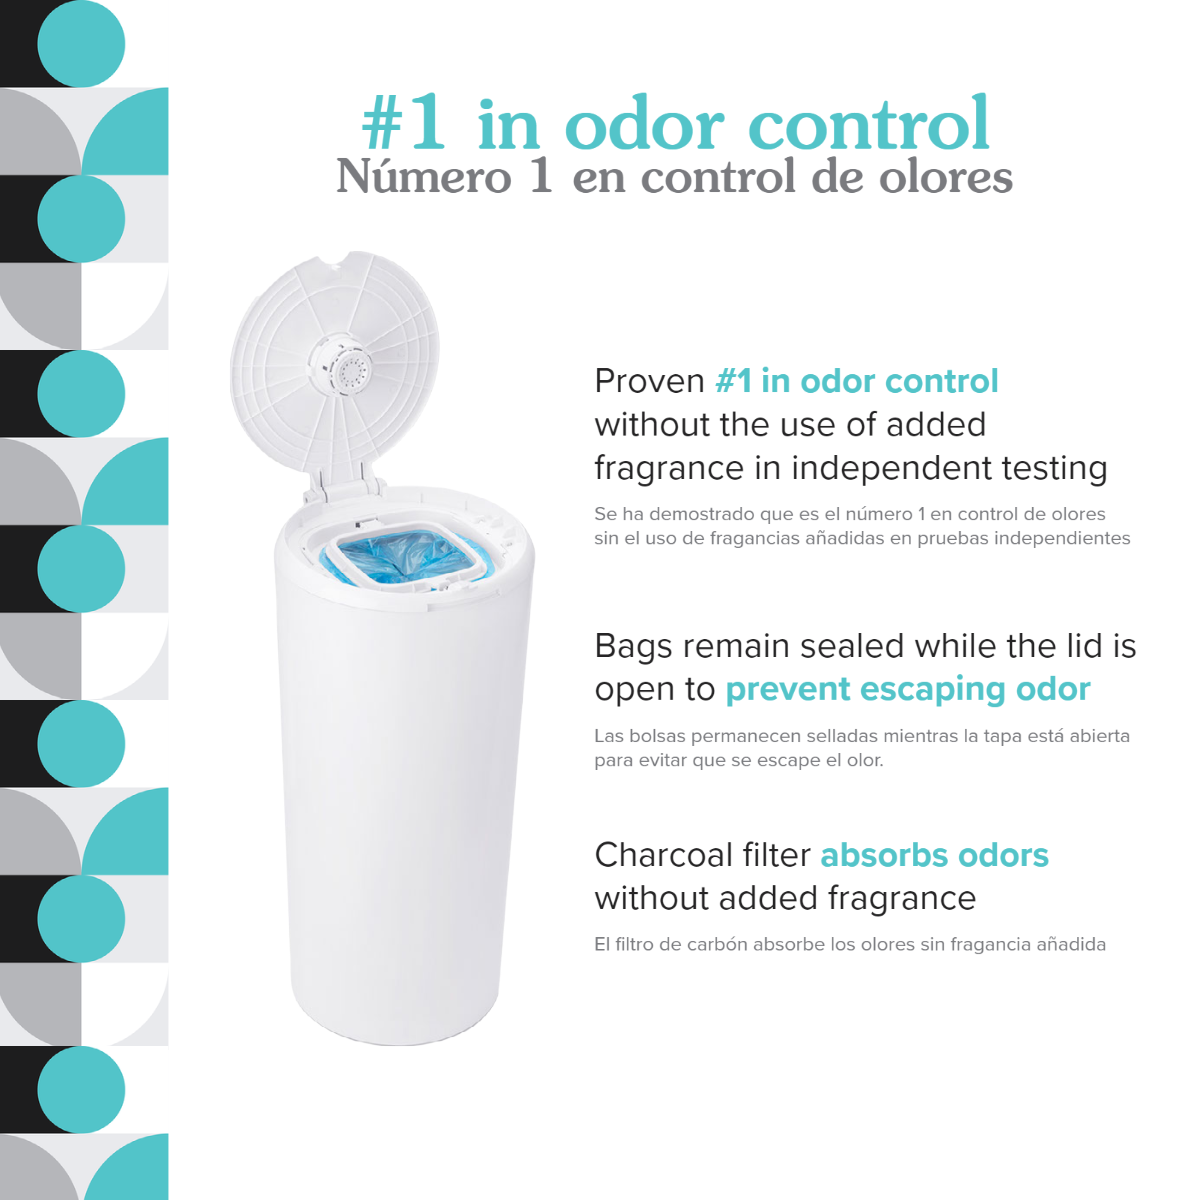 PurePail Classic Diaper Pail Shown With Lid Open and Explanation of Odor Control Benefits